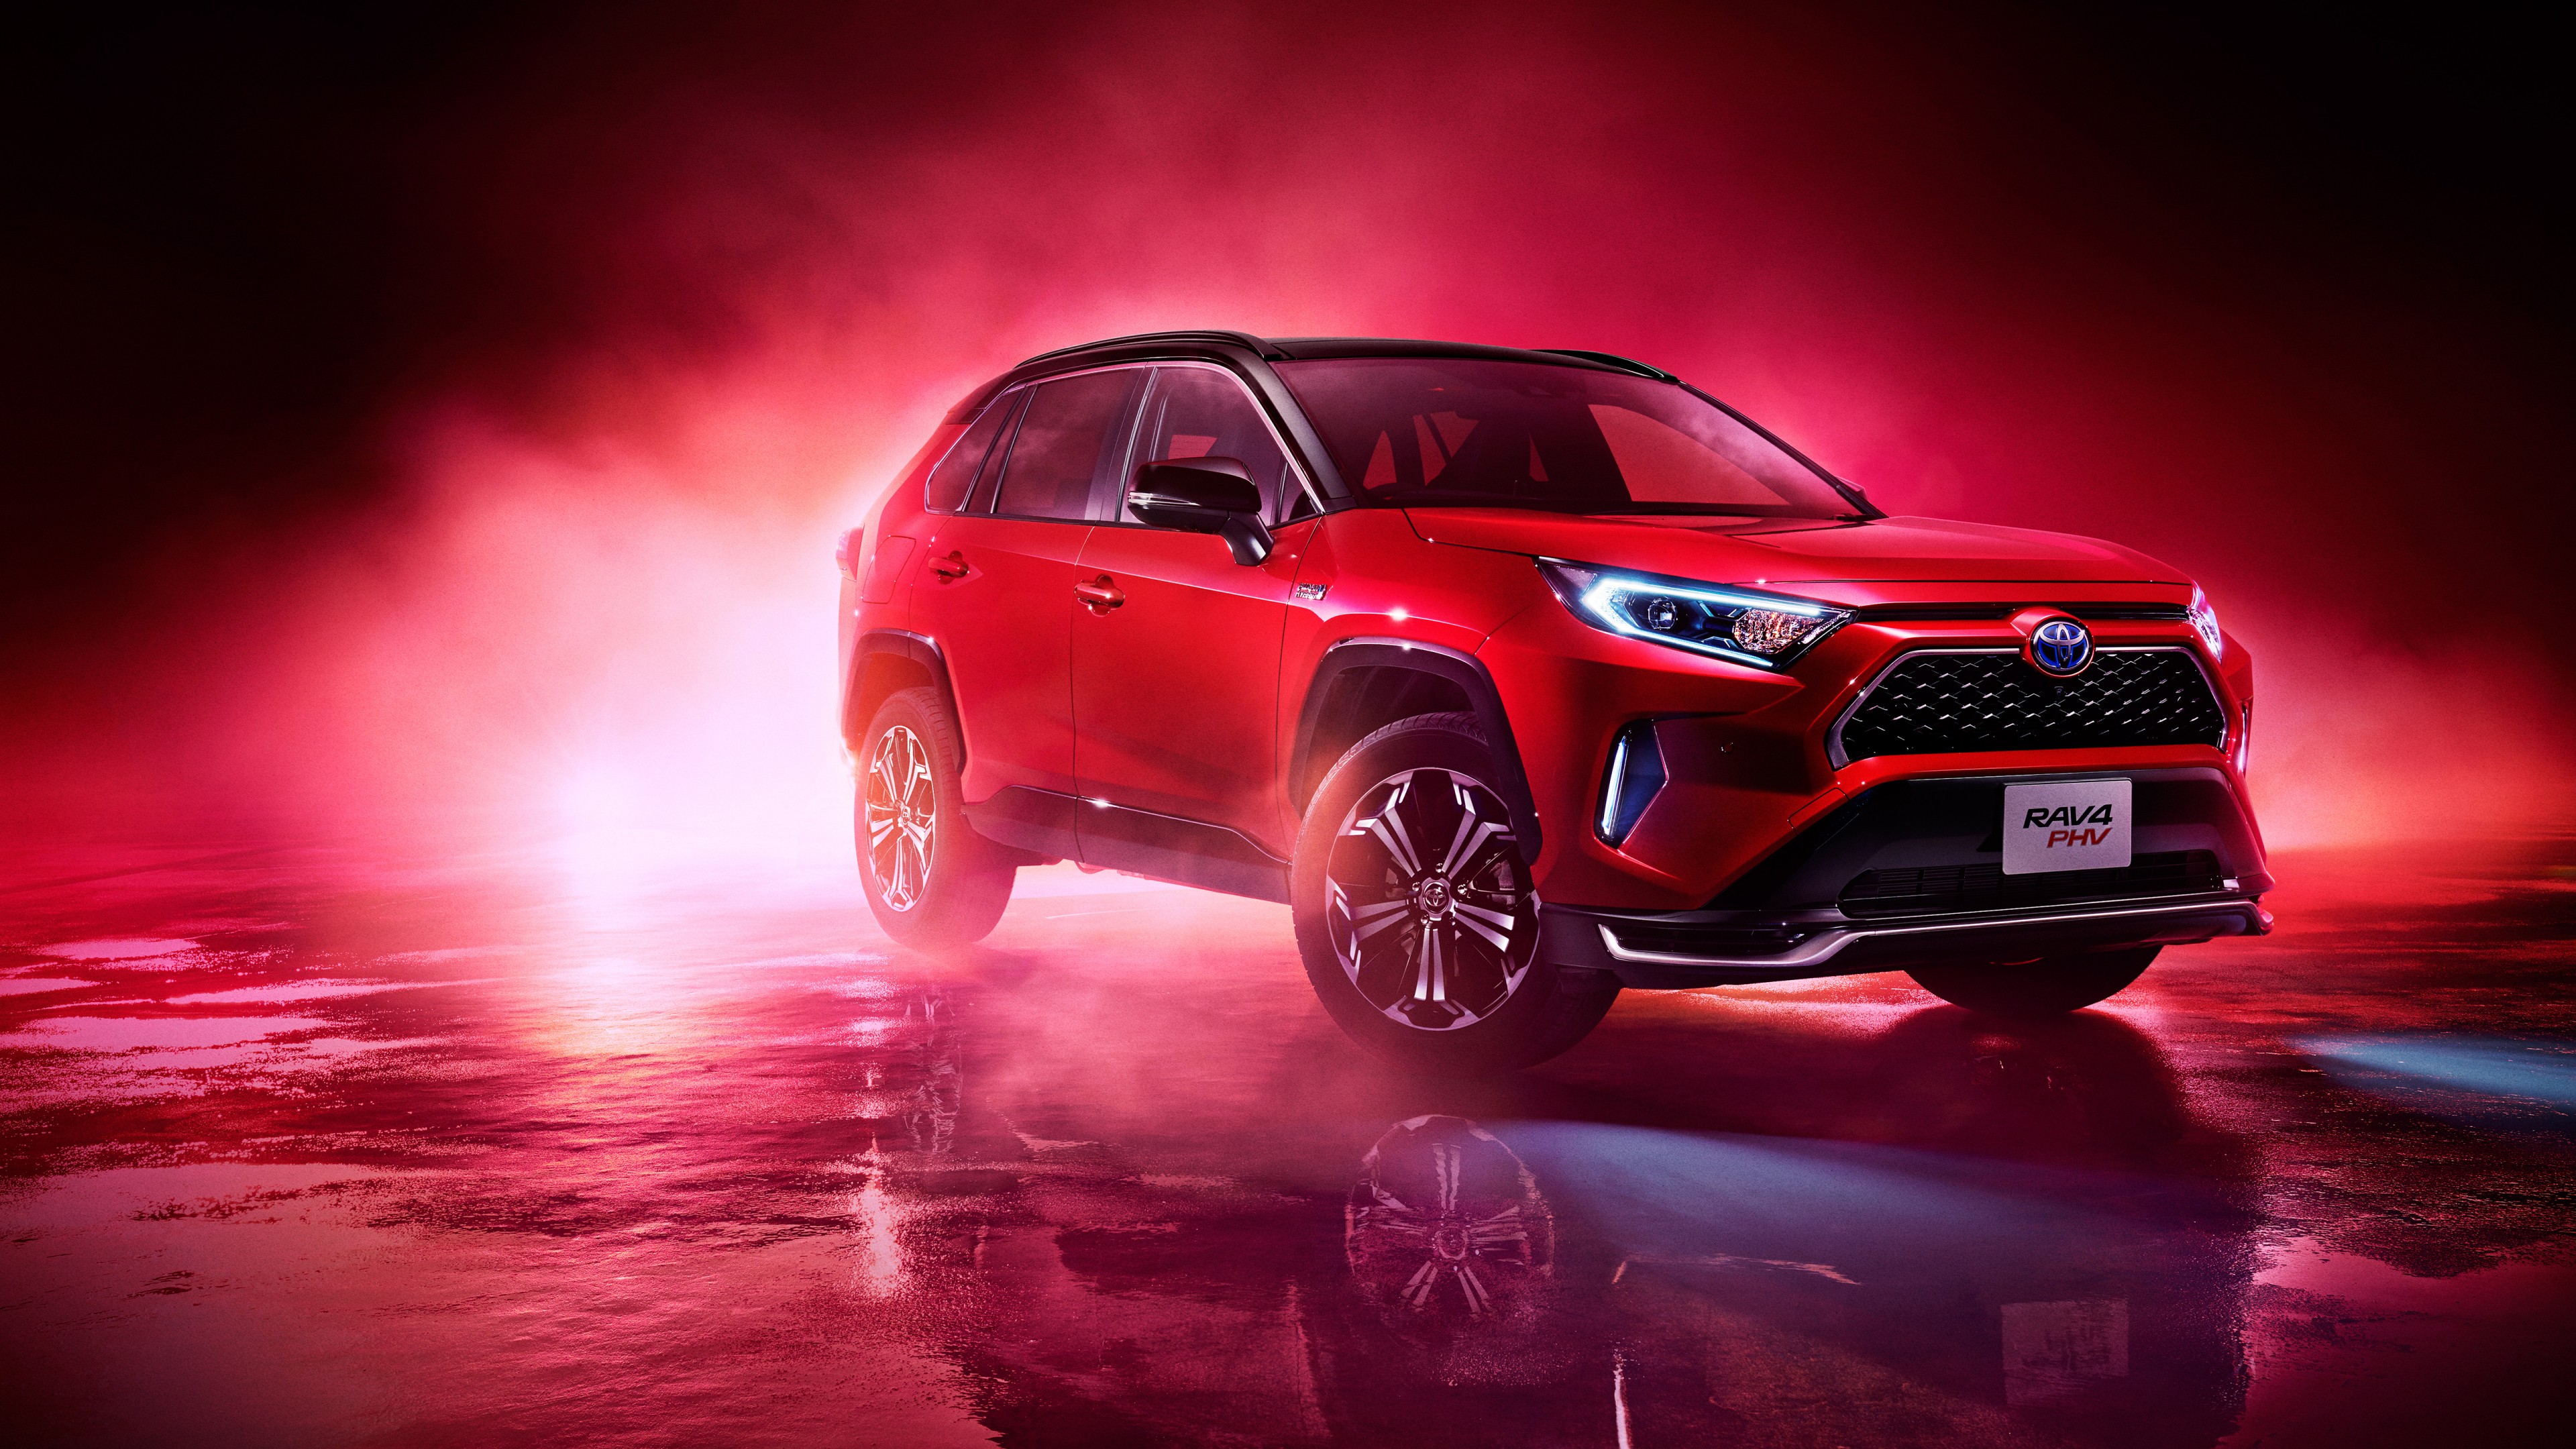 General 3840x2160 Toyota Toyota RAV4 car SUV vehicle red cars Japanese cars red background reflection